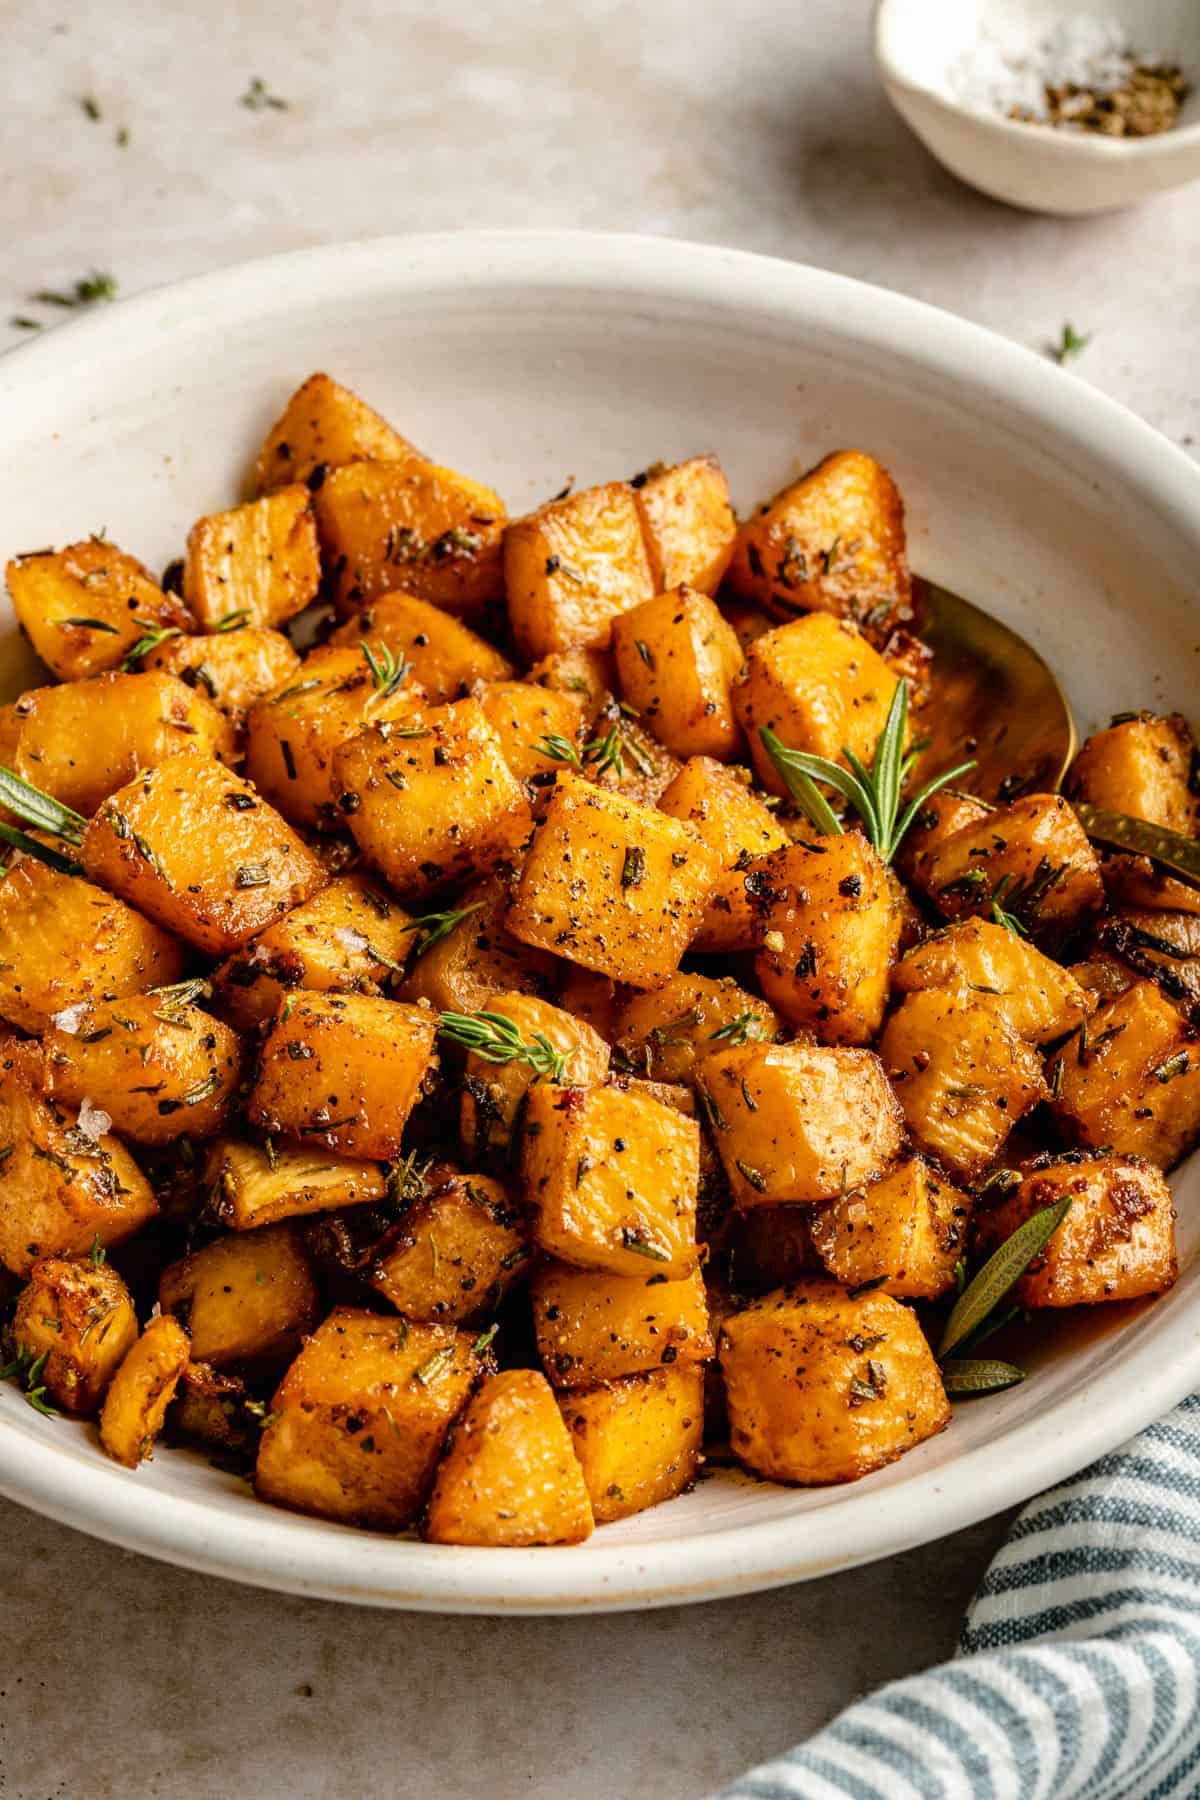 Roasted swede (rutabaga) cubes coated in herbs in a bowl with a spoon with a dish in the background.